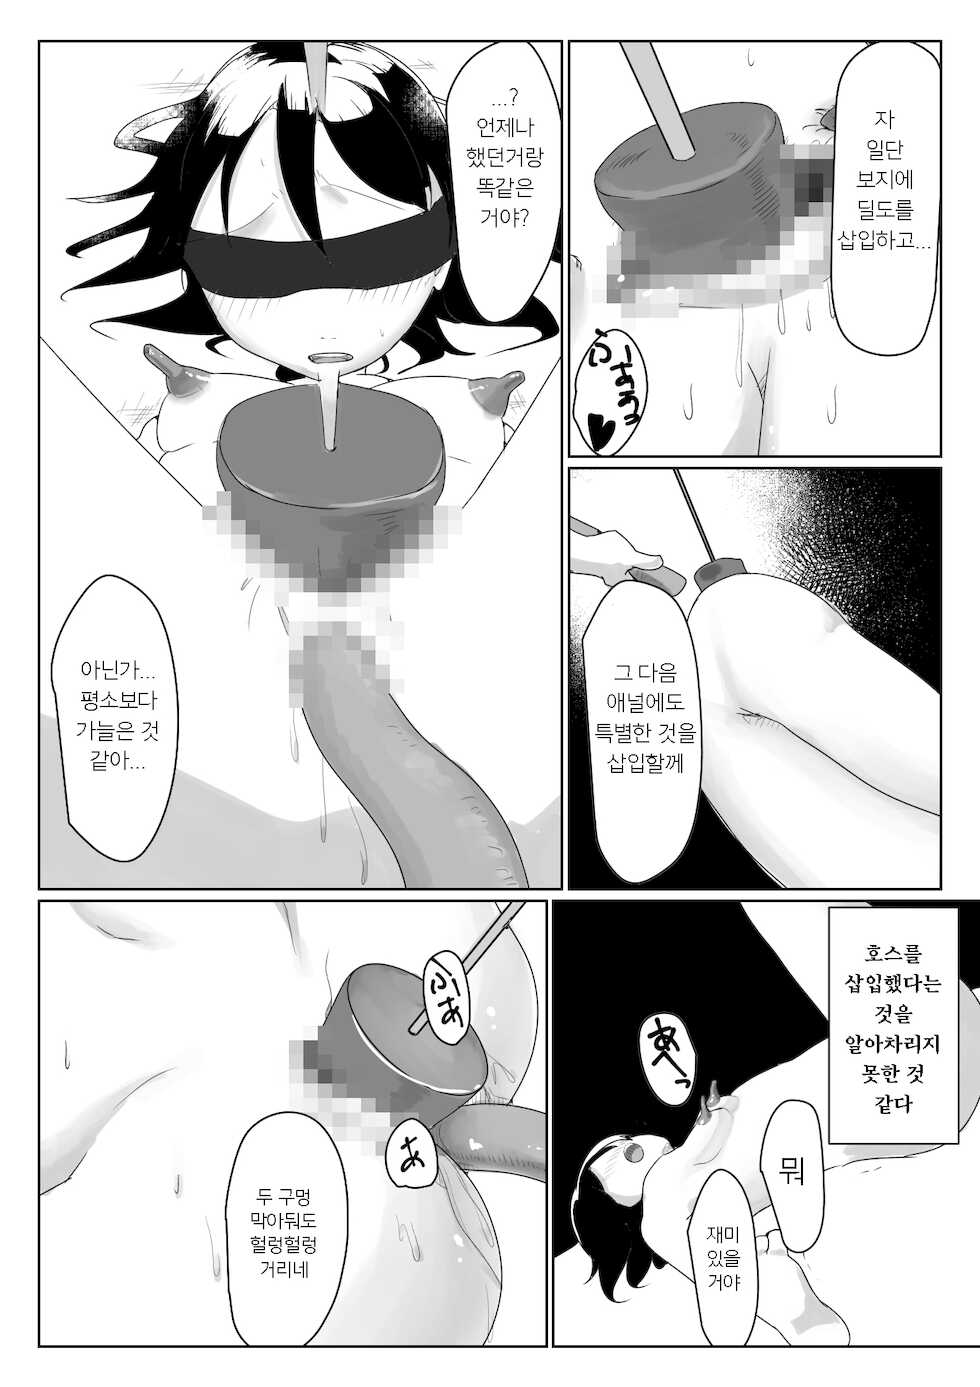 [Dejimeshi] "Someone help me" ~ Lori abducted genitals and mental destruction ~ - Page 19